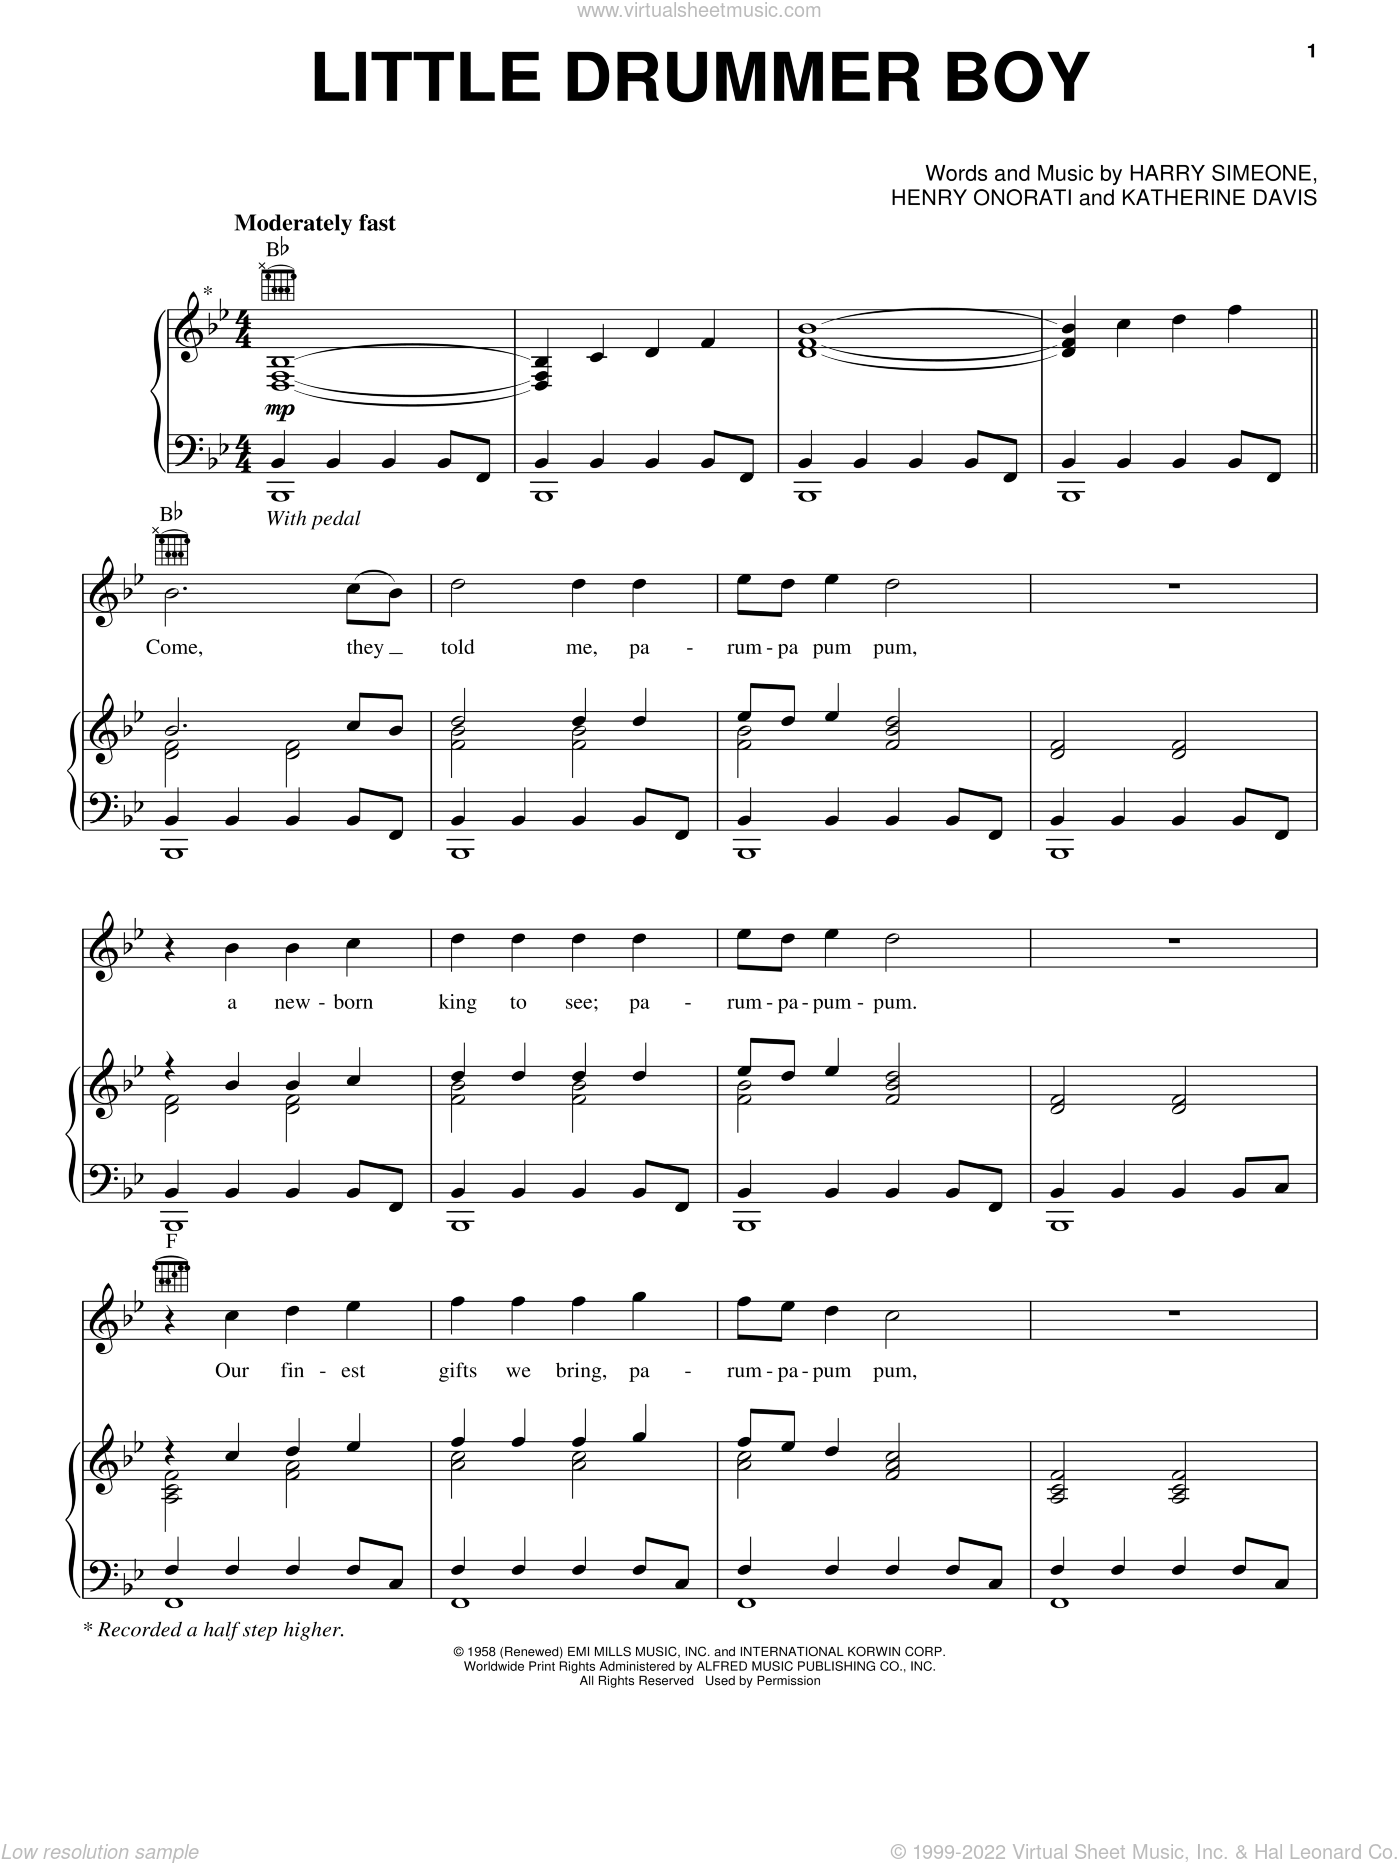 Seger - The Little Drummer Boy sheet music for voice, piano or guitar